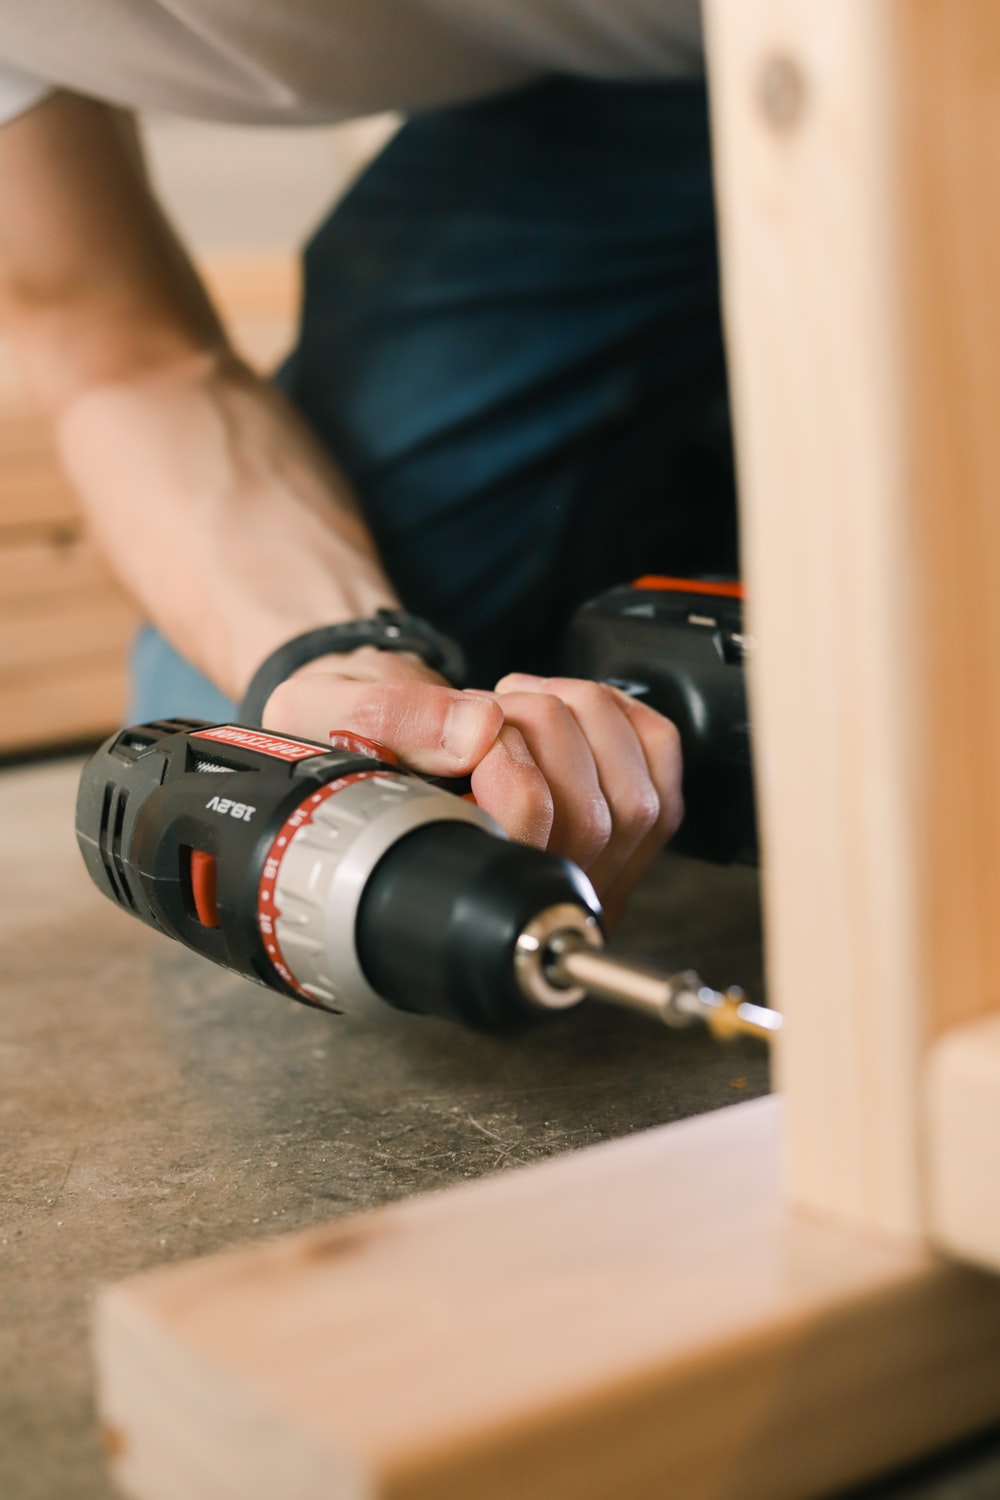 Power Drill Picture. Download Free Image